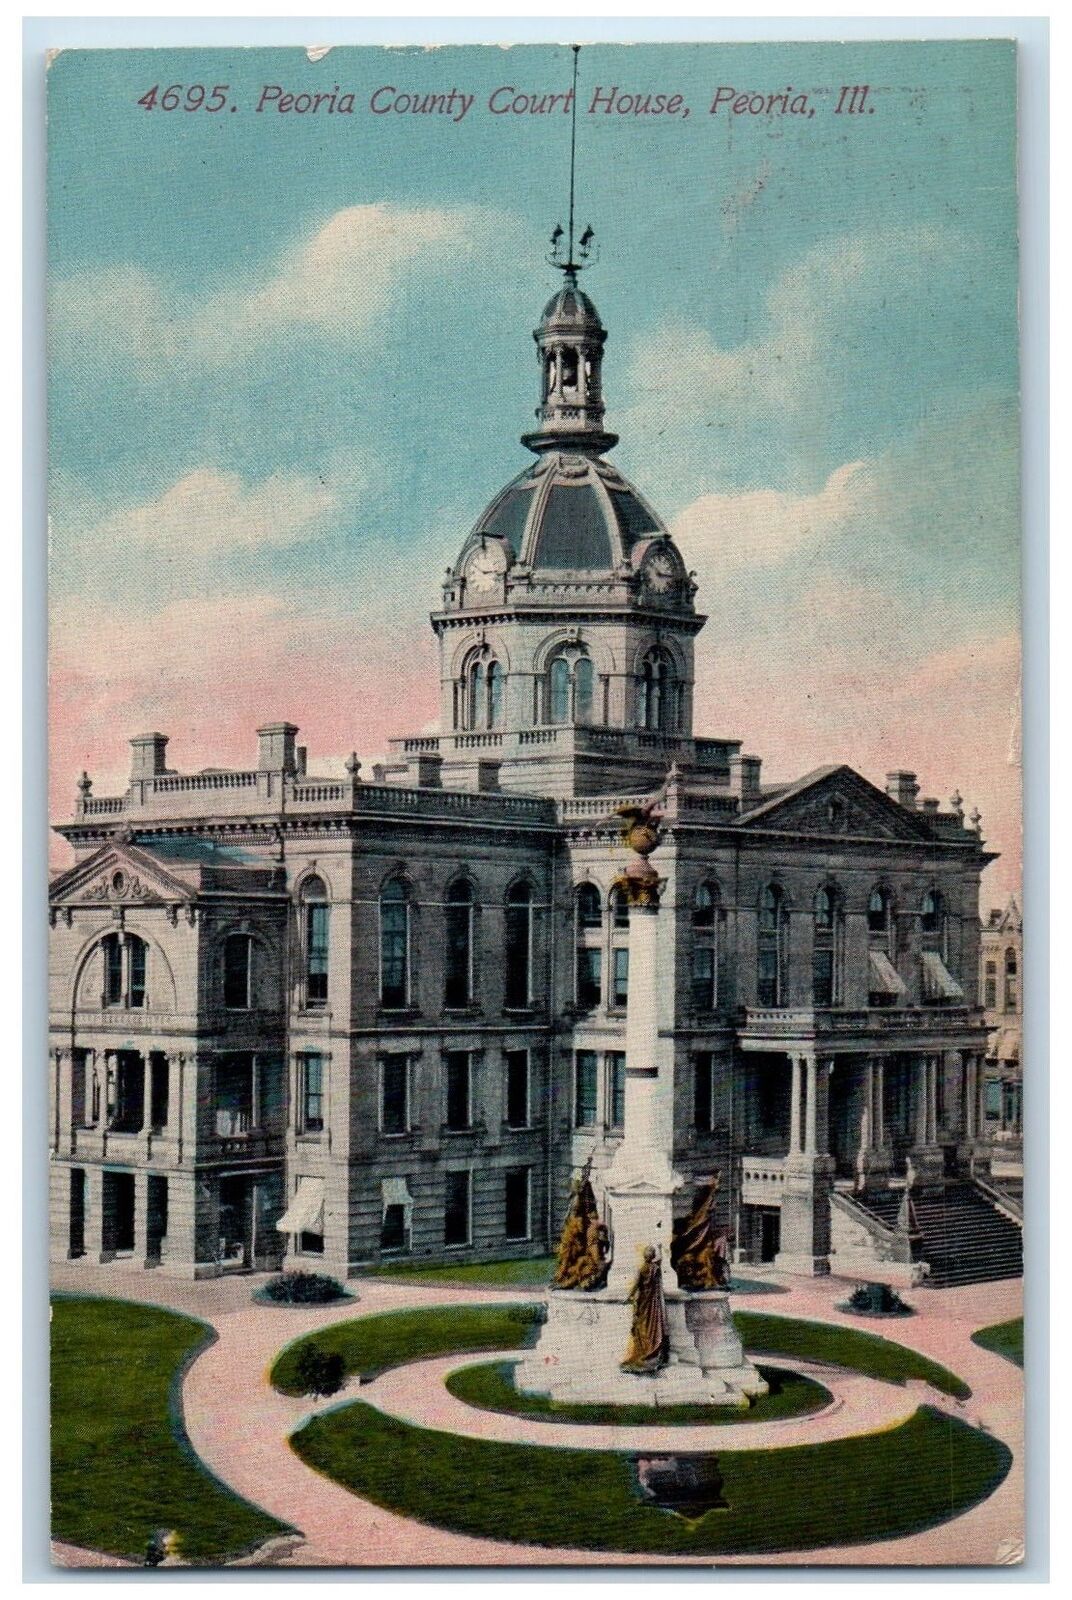 1912 Peoria County Court House Dome Building Monument View Illinois IL Postcard